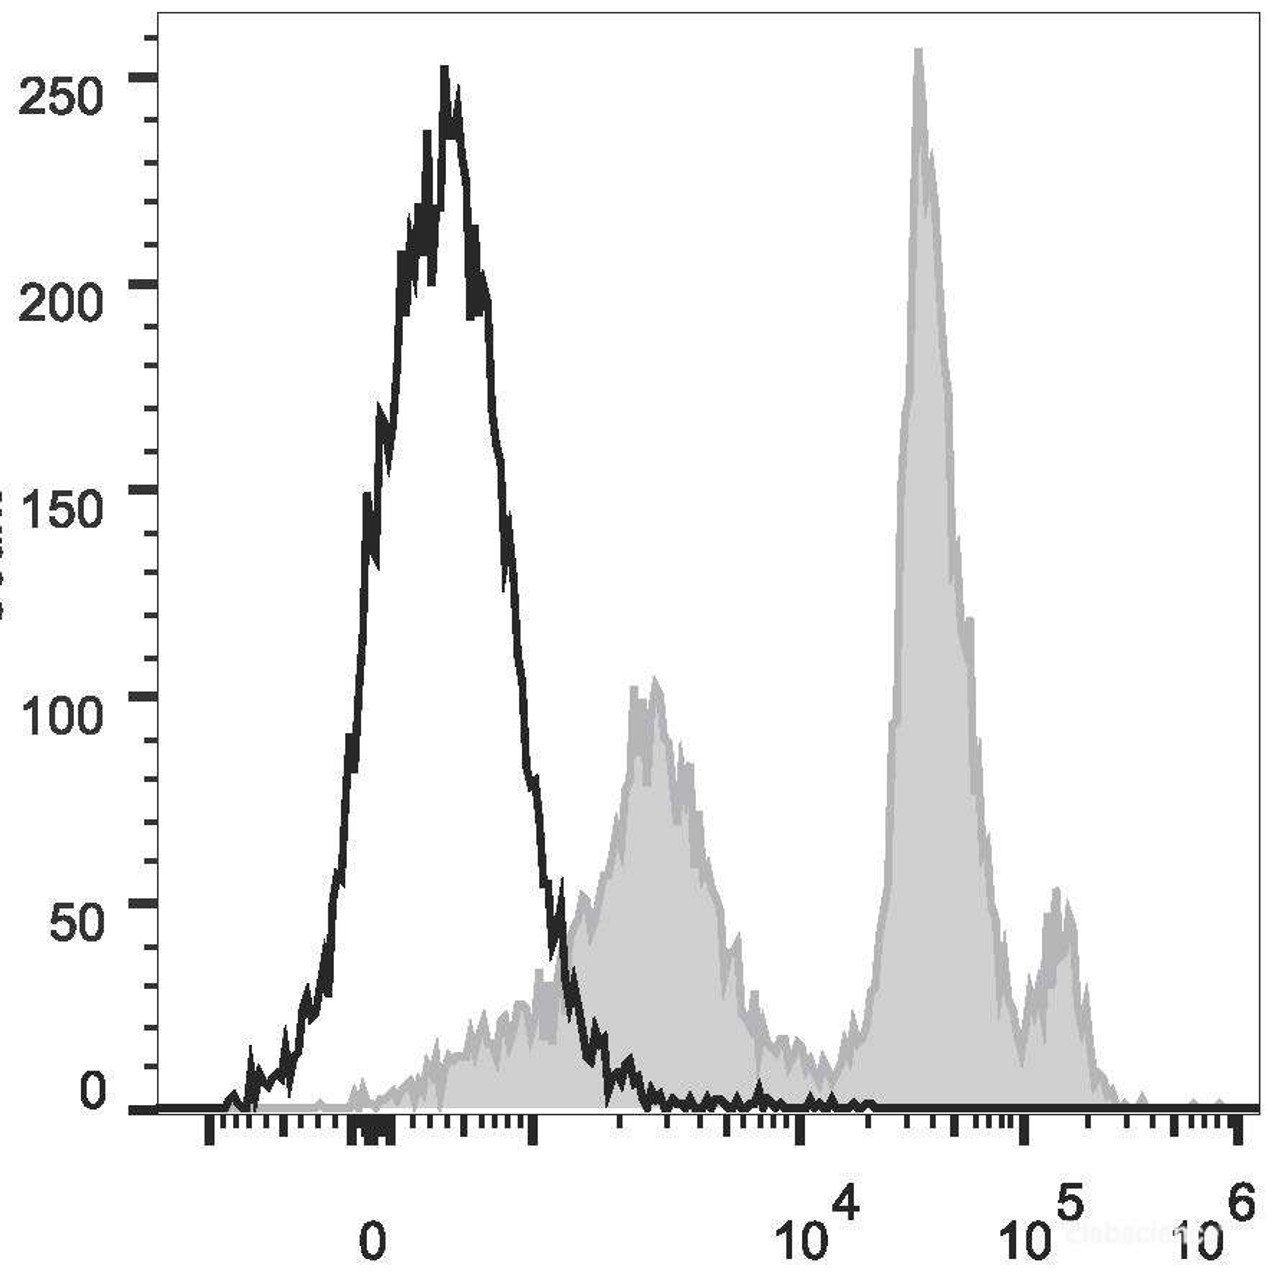 C57BL/6 murine bone marrow cells are stained with PE/Cyanine5.5 Anti-Mouse Ly6C Antibody[Used at .2 μg/1<sup>6</sup> cells dilution](filled gray histogram). Unstained bone marrow cells (empty black histogram) are used as control.